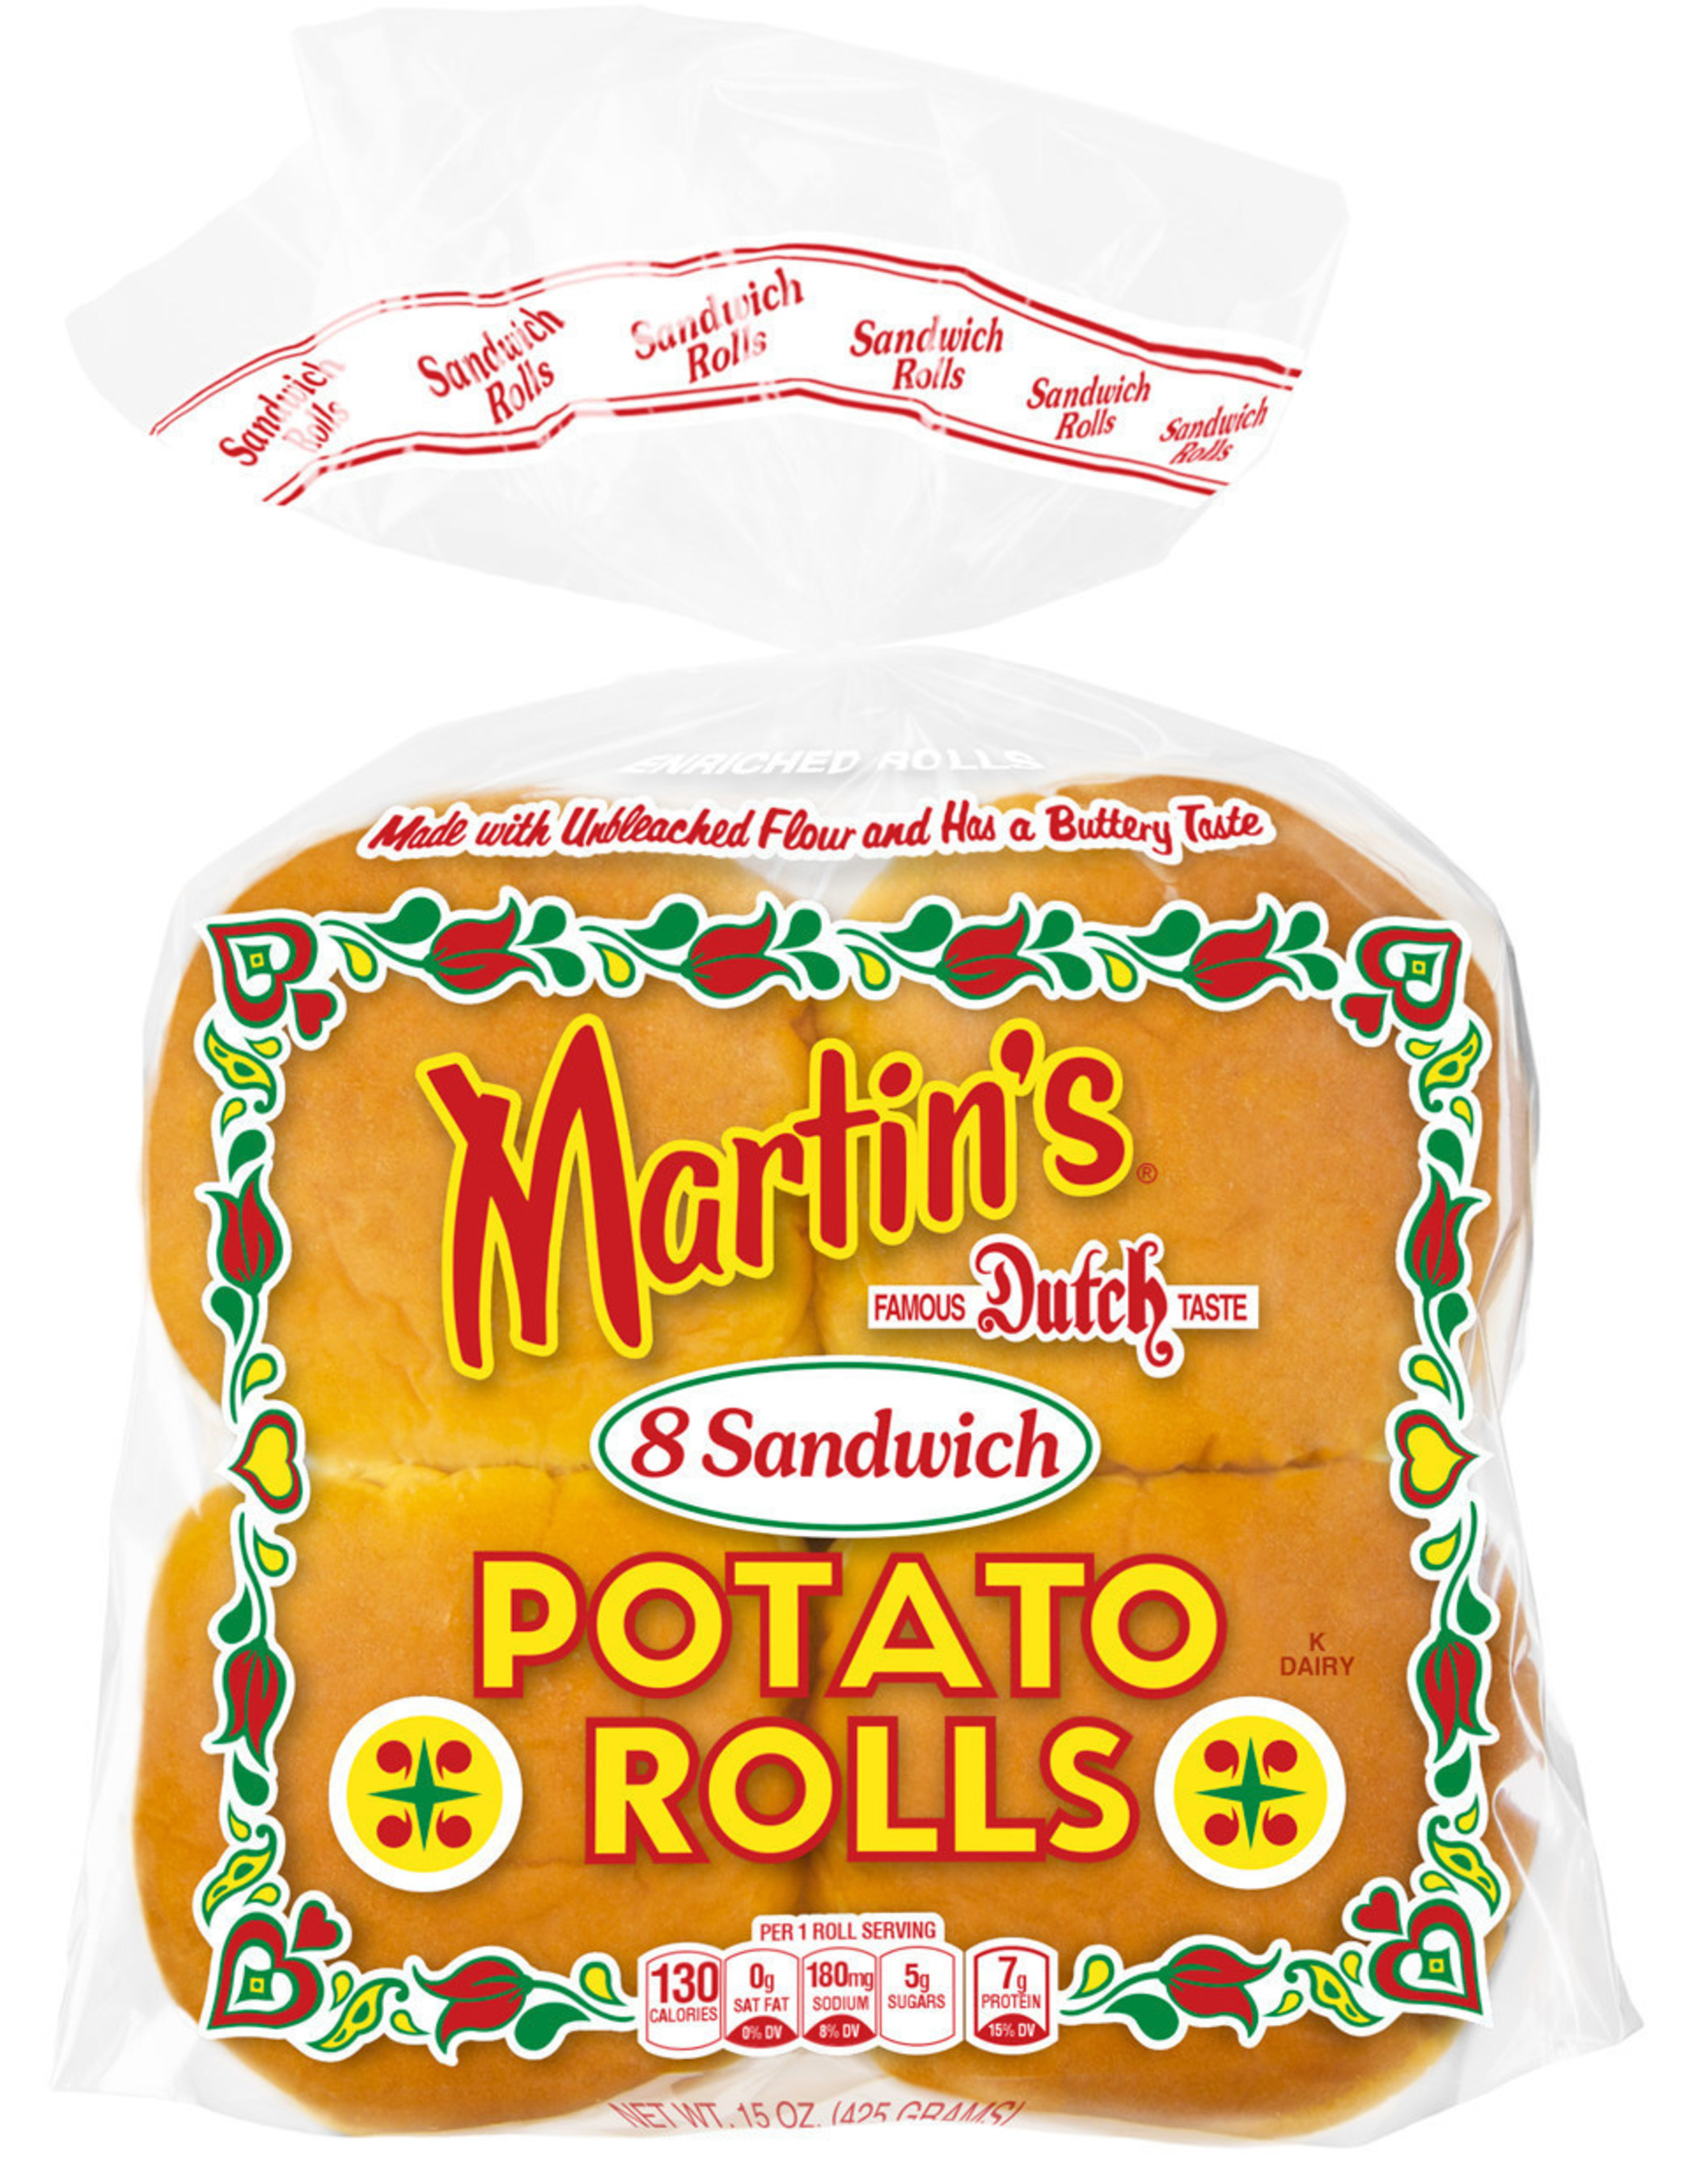 Martin's Famous Sandwich Potato Rolls are the number one branded hamburger roll in America!